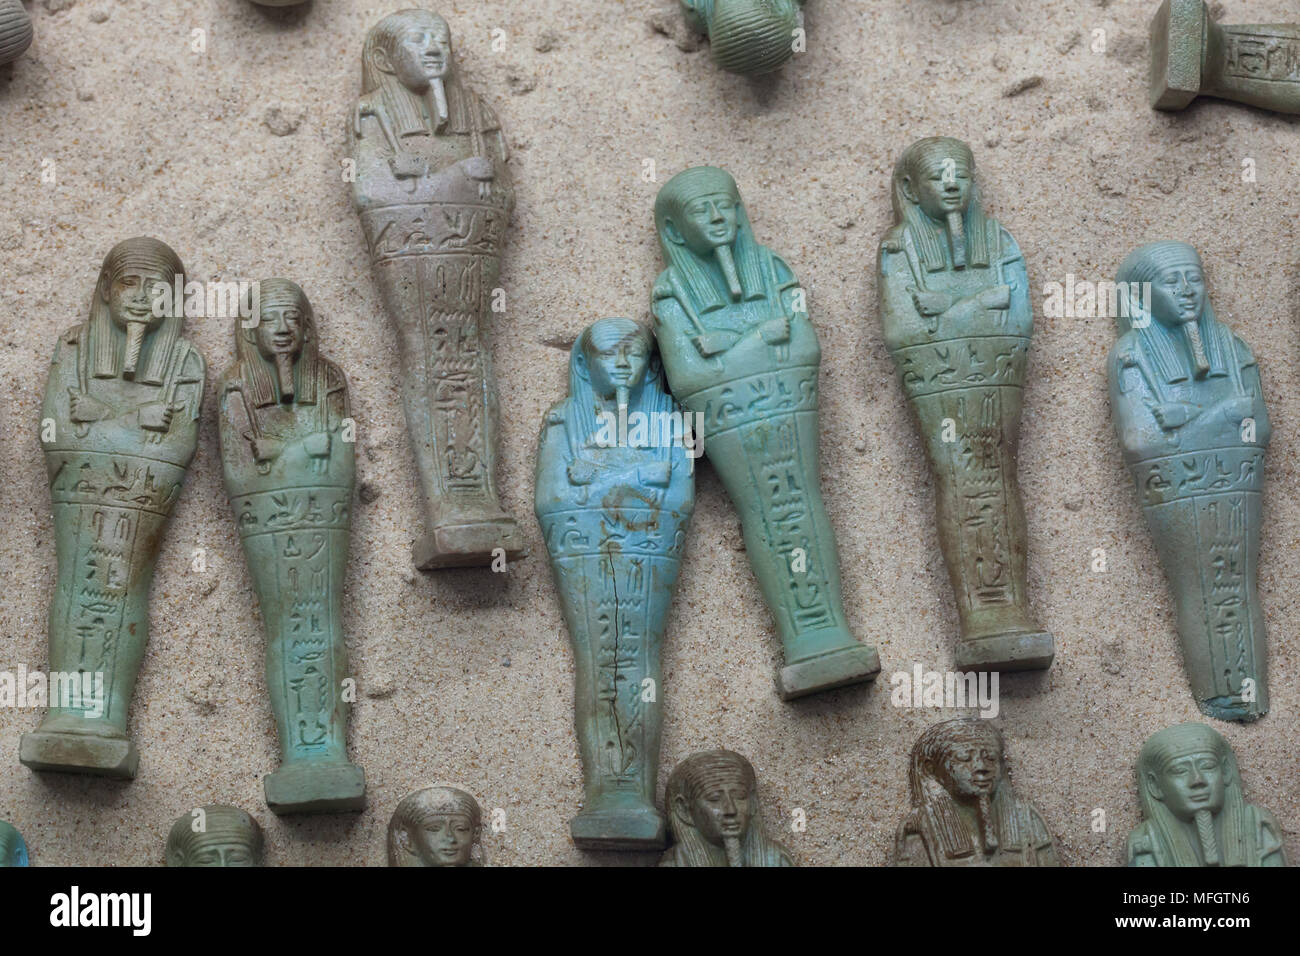 Ancient Egyptian ushabtis (funerary statuettes) of Herugia, born of Asetemhat, dated from the 28th to the 30th Dynasty (404-332 BC) found in Giza on display in the National Archaeological Museum (Museo Archeologico Nazionale di Napoli) in Naples, Campania, Italy. Stock Photo